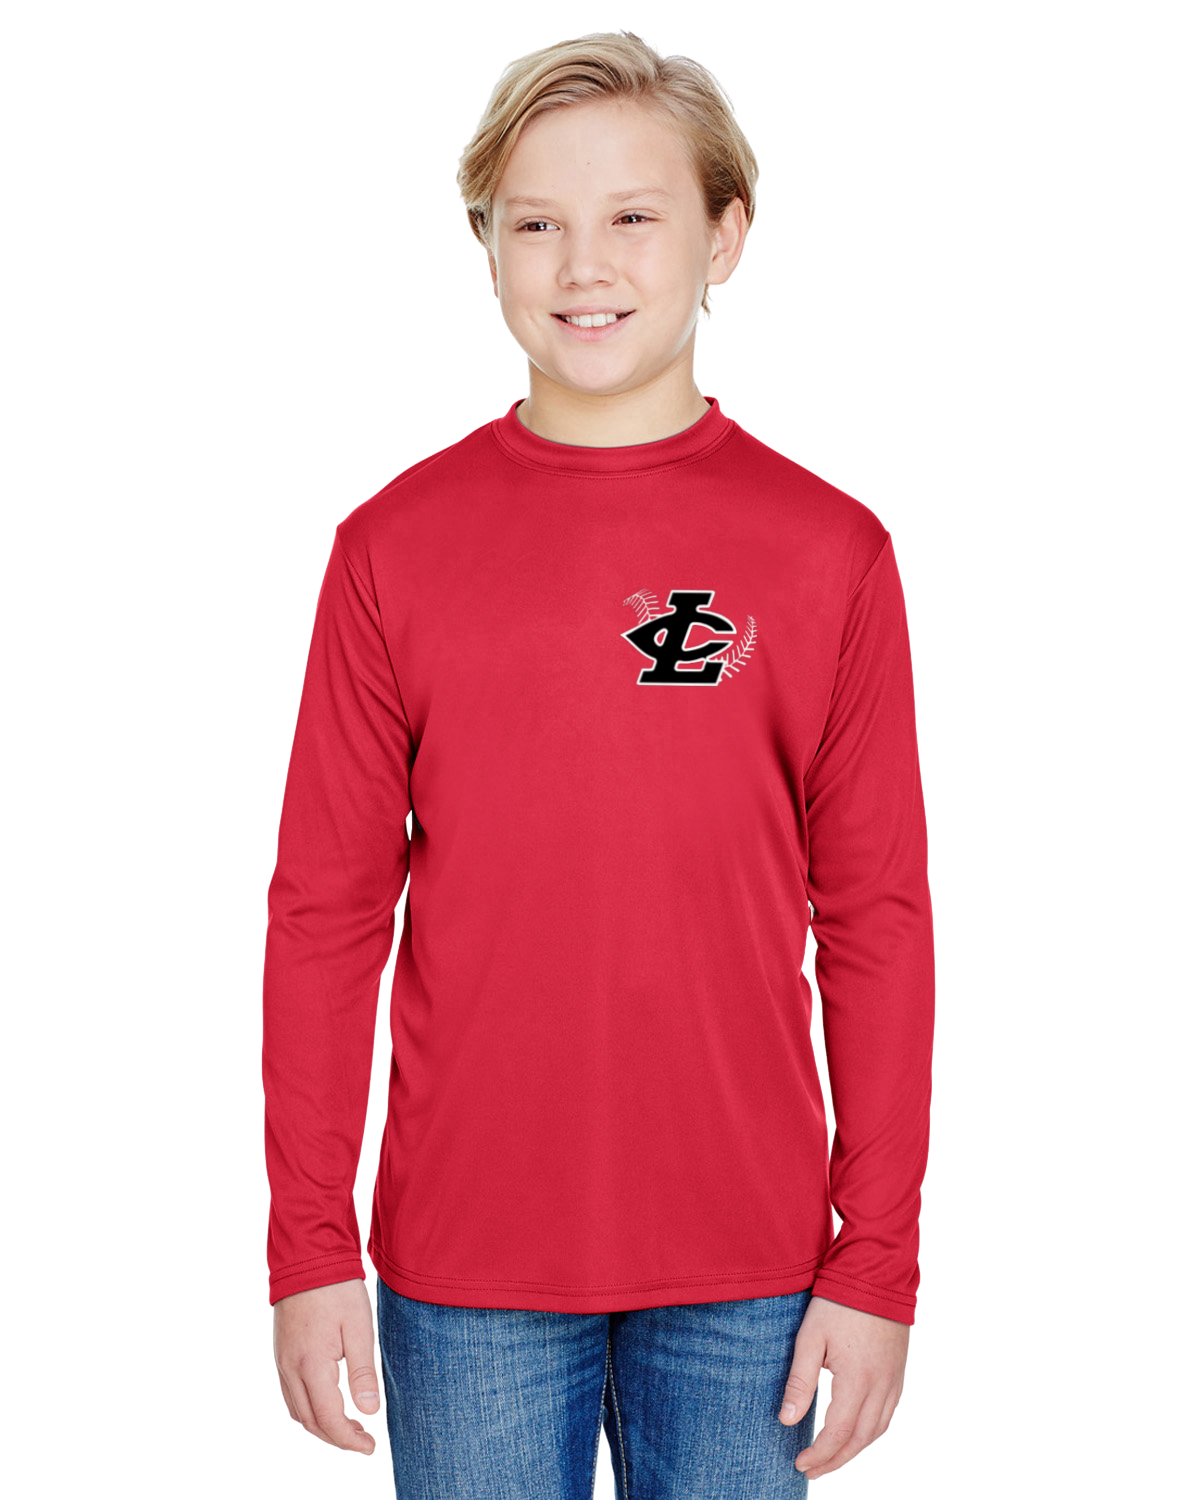 CLLL A4 Youth Cooling Performance Long Sleeve T-Shirt RED